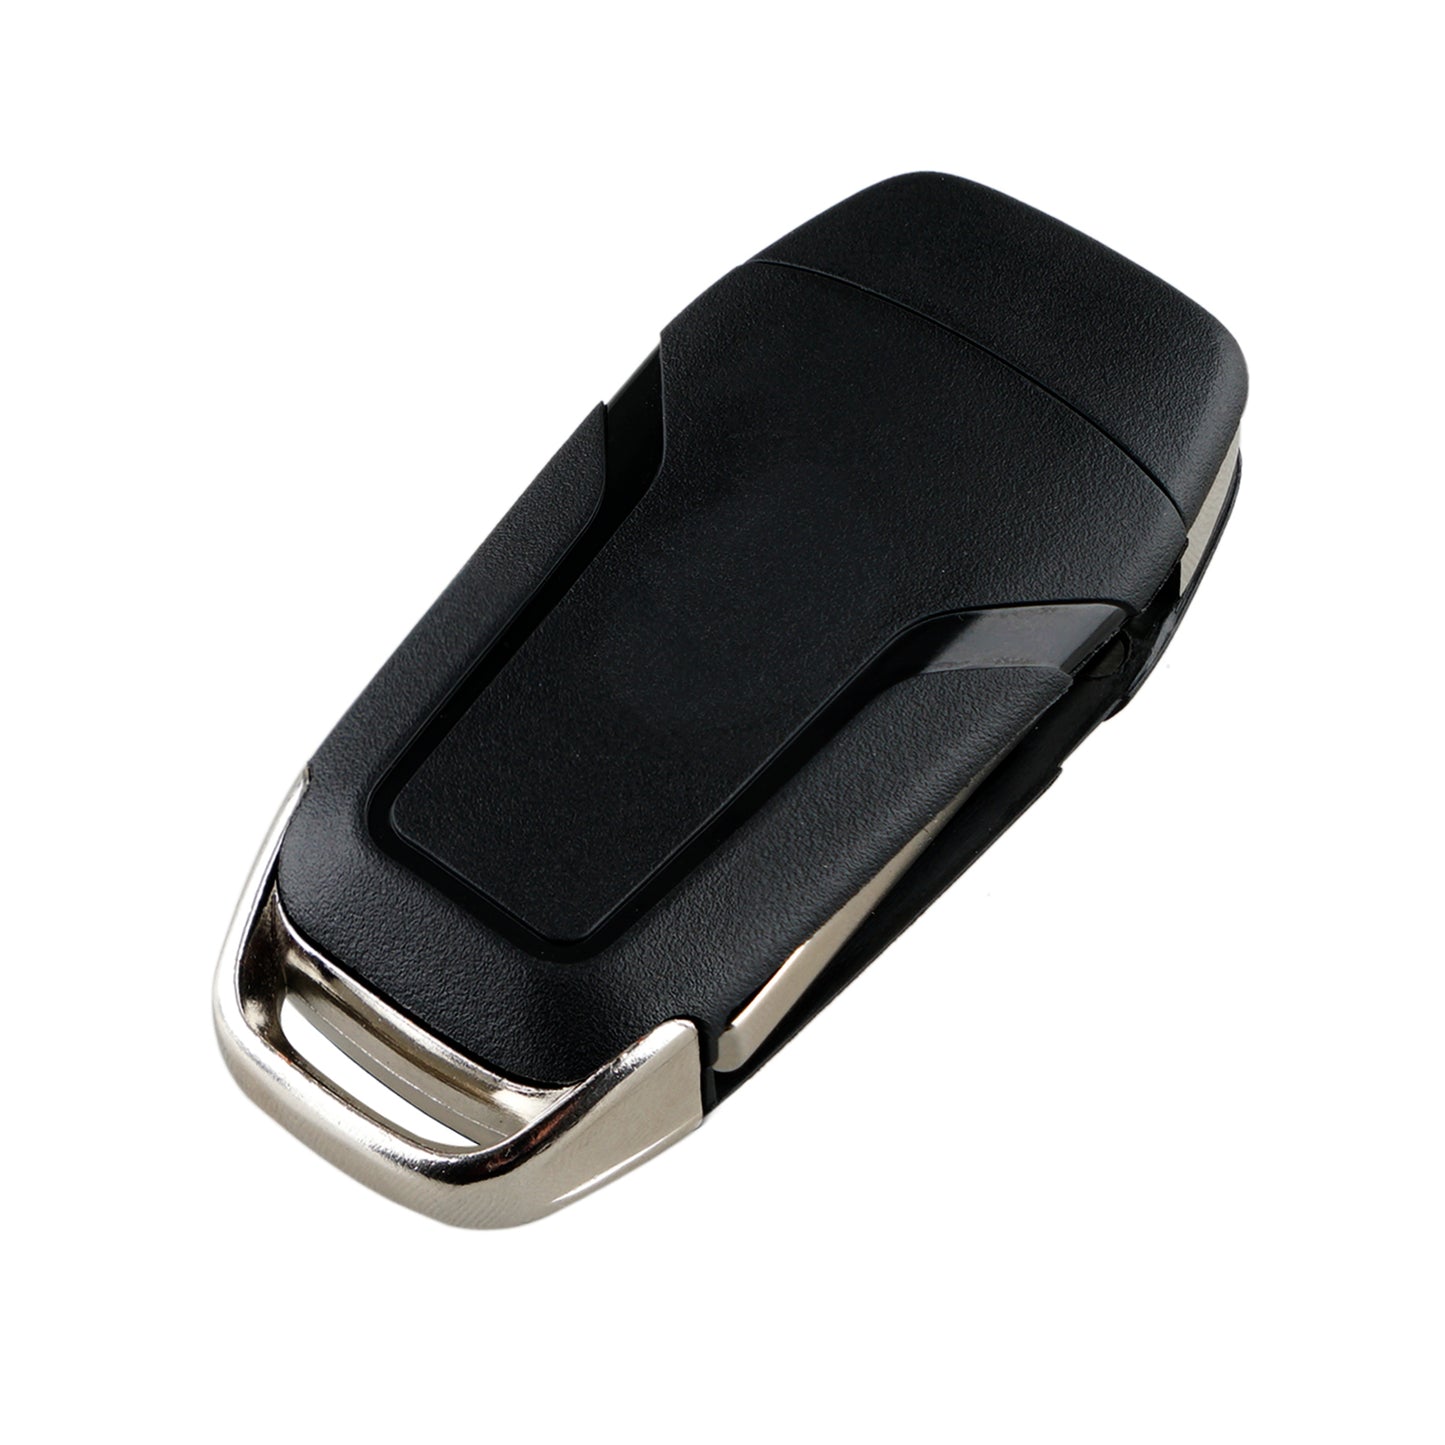 4 Buttons 315MHz Keyless Entry Fob Smart Remote Key For 2013-2016 Ford Fusion FCC ID: N5F-A08TAA SKU : J096